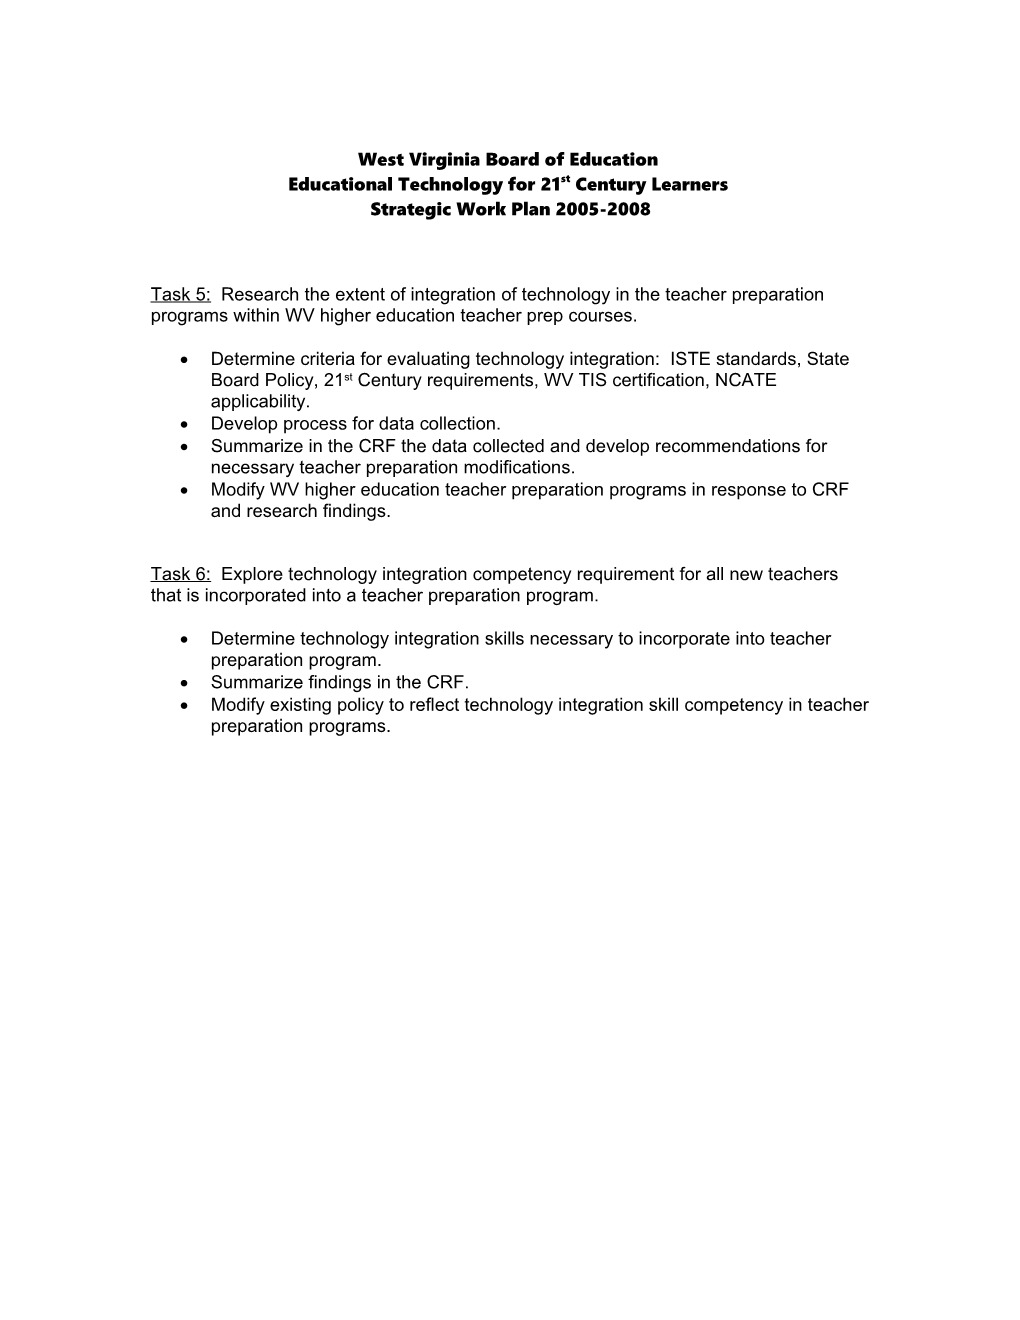 WVBE Technology-Related Requirements for Educator Preparation Programs As Specified In